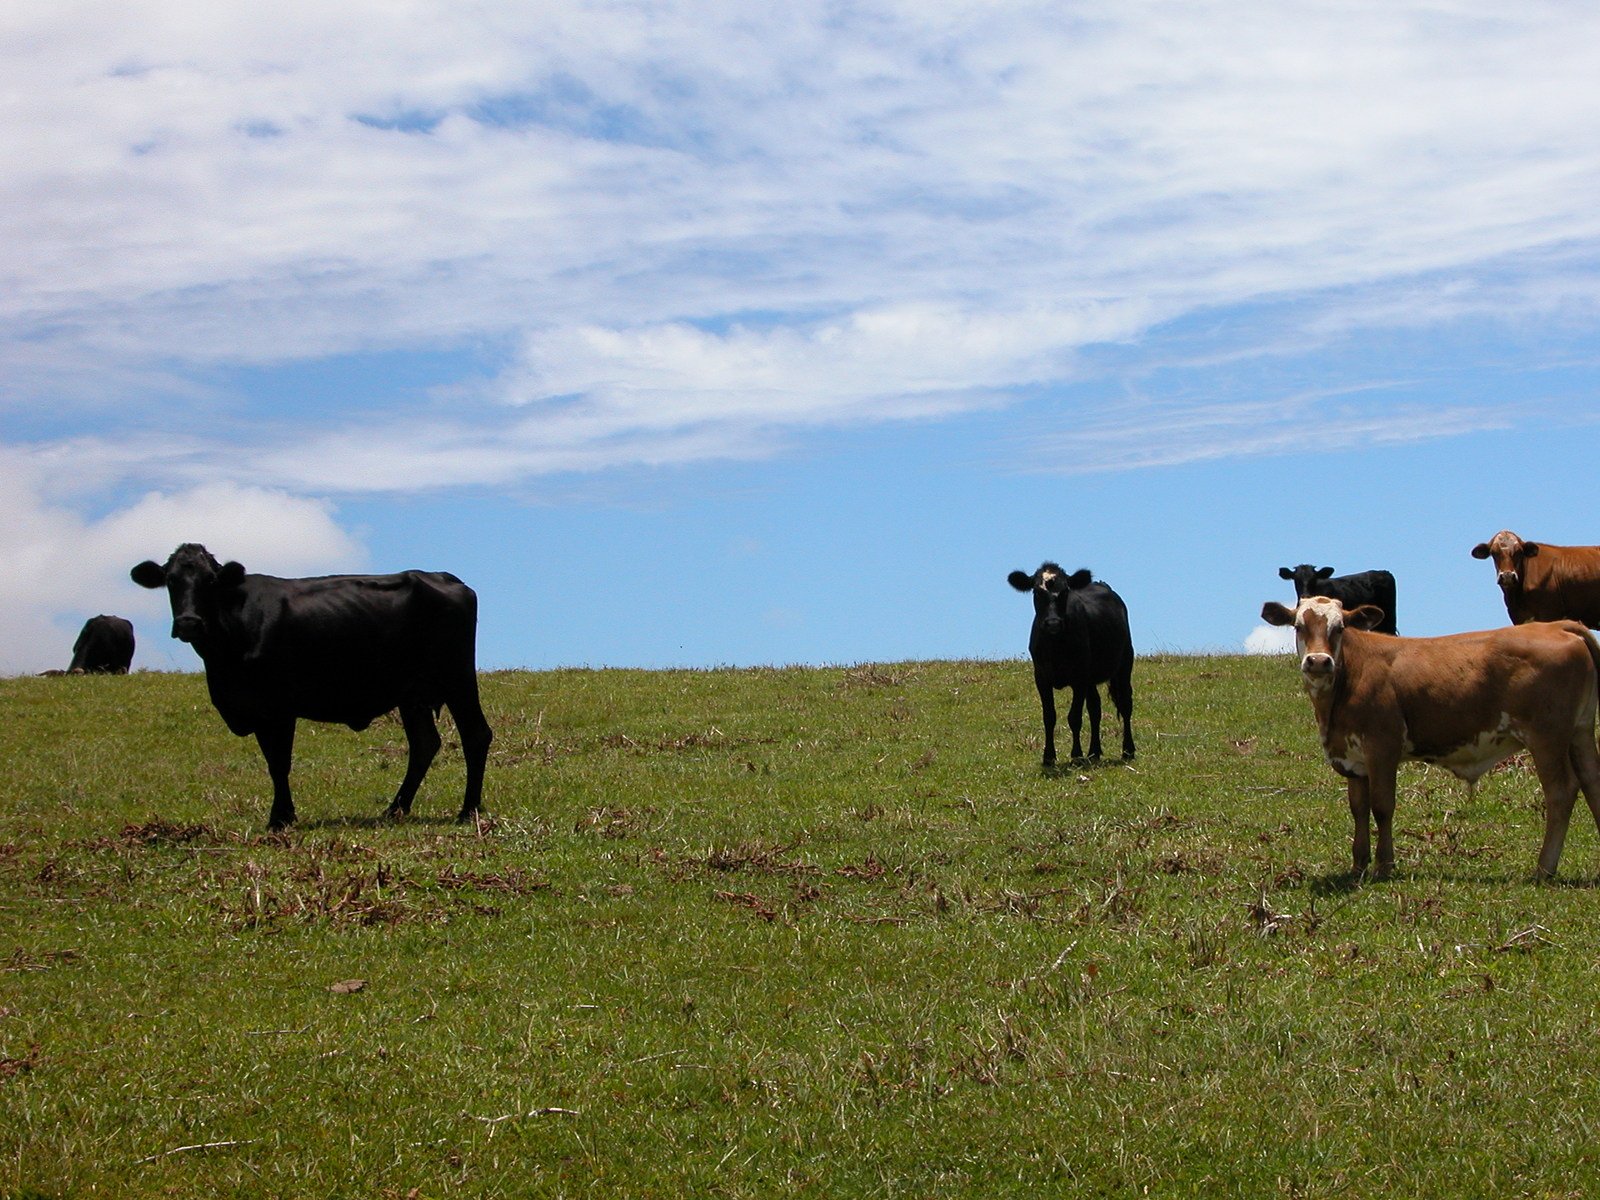 four cows are standing on a hill looking at the camera